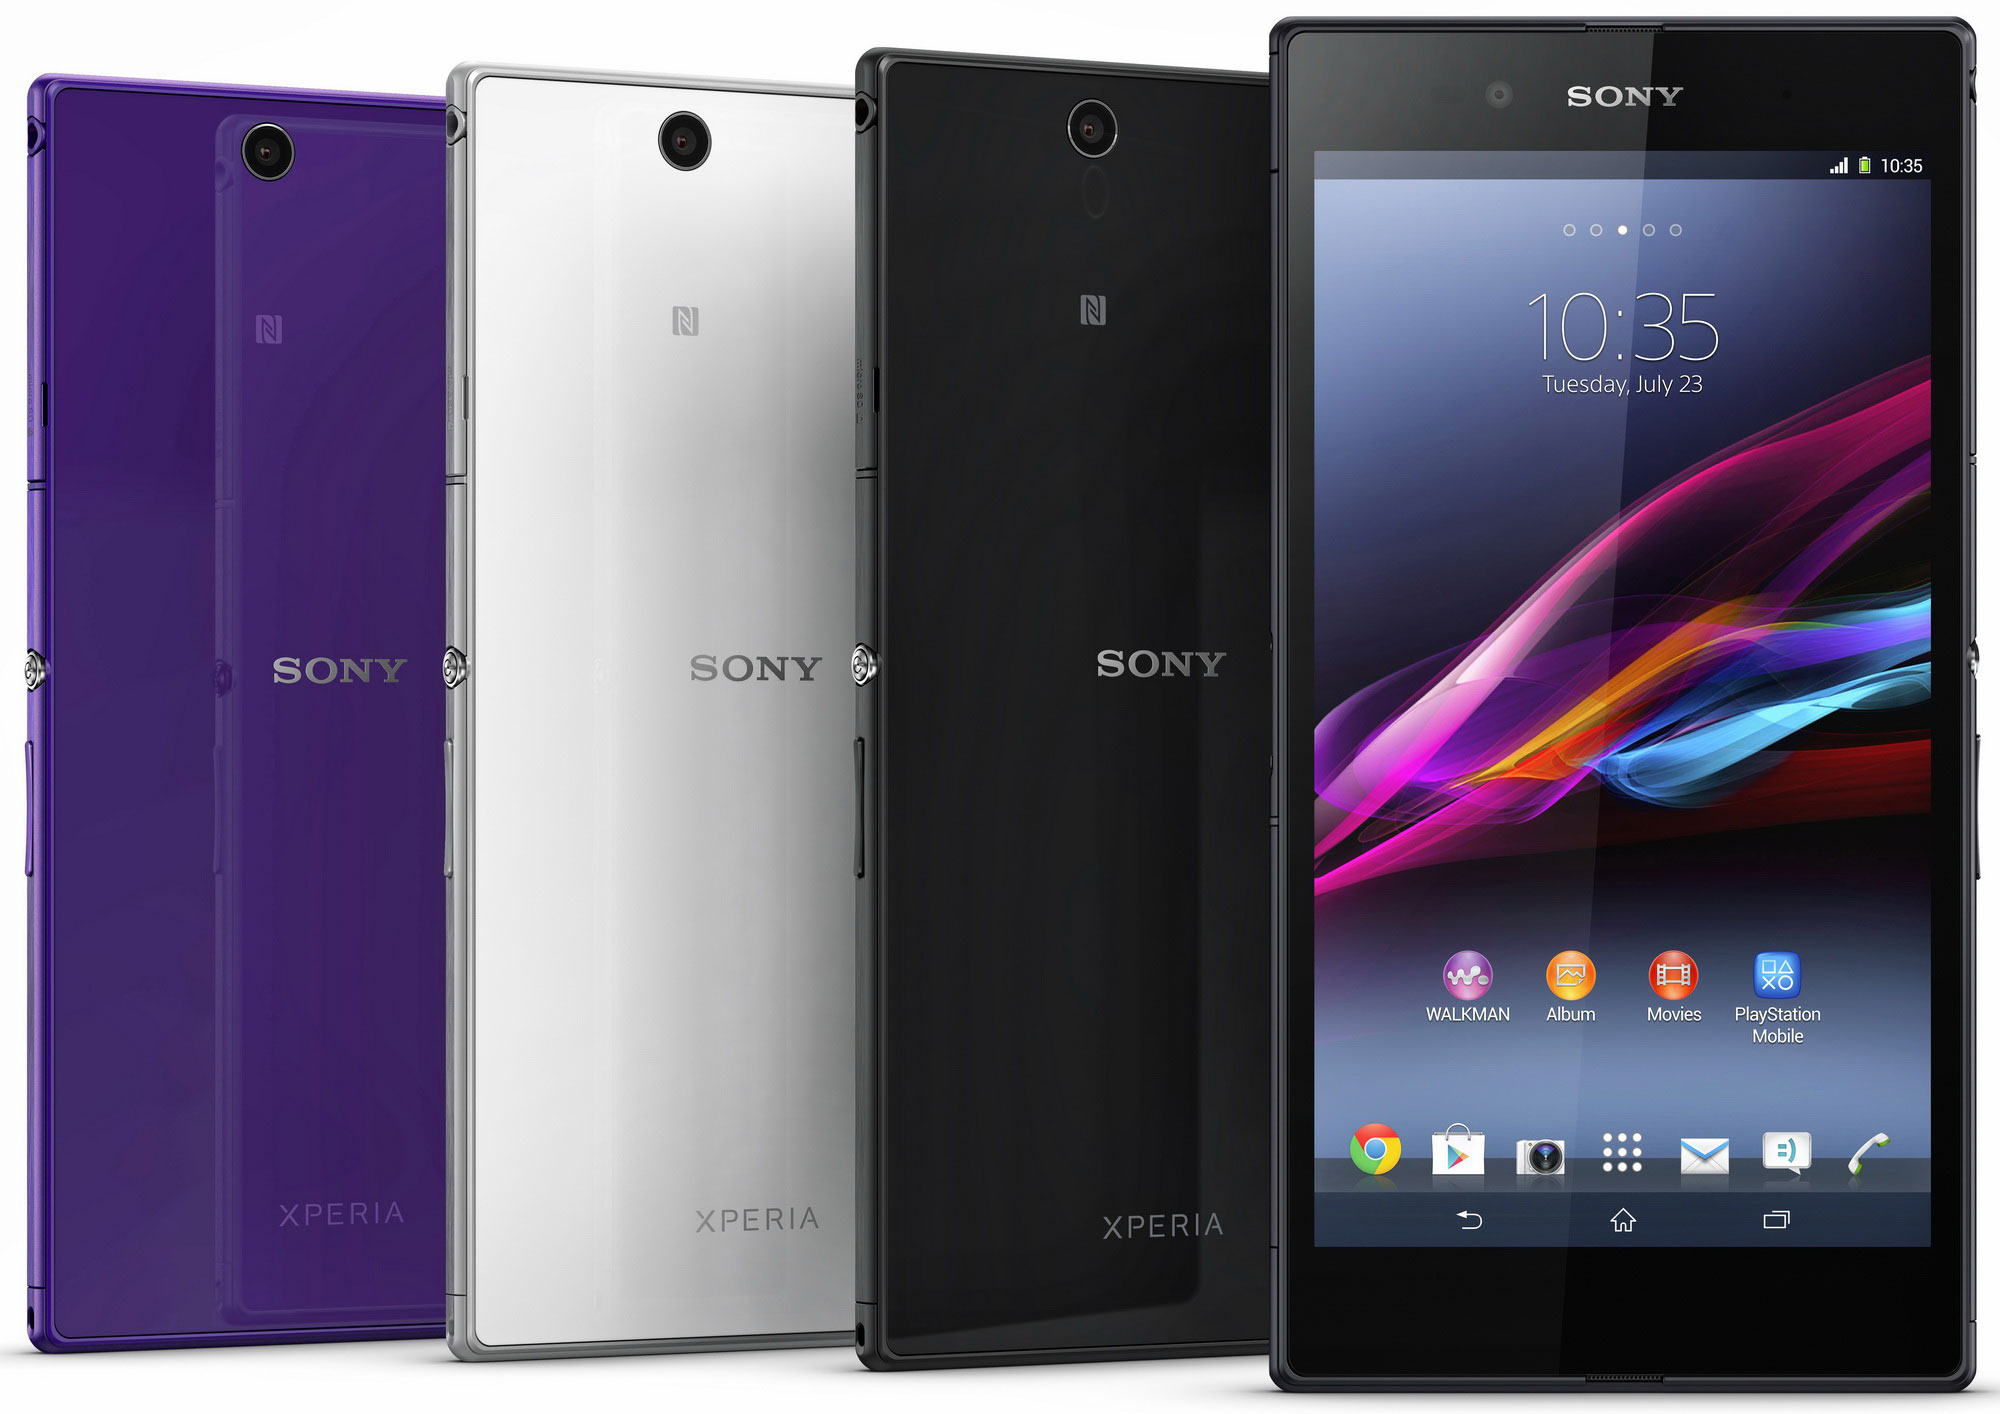 Xperia Z Ultra C6802 - Specs and Price - Phonegg